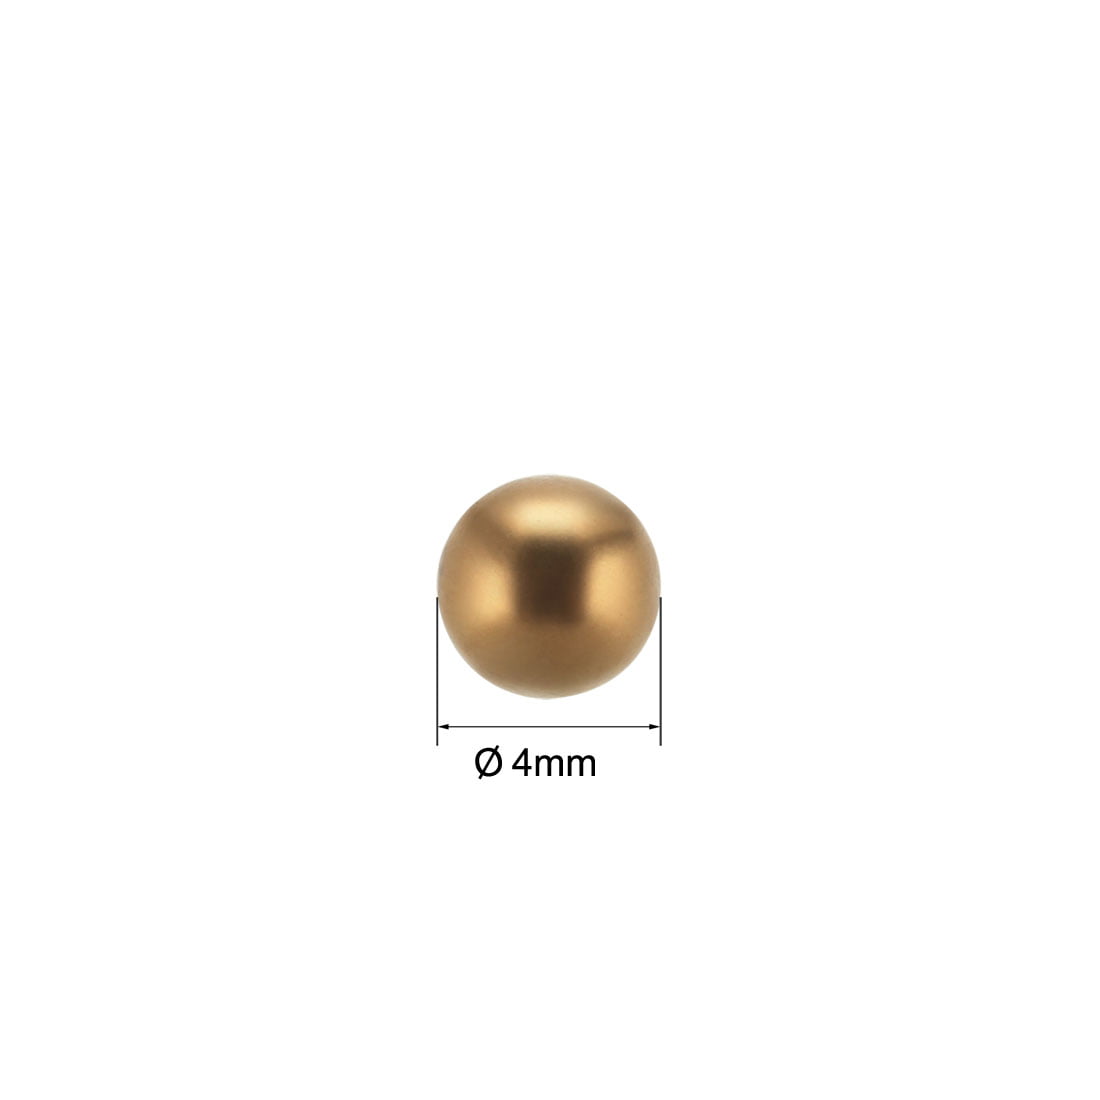 uxcell 4mm Precision Solid Brass Bearing Balls 50pcs 